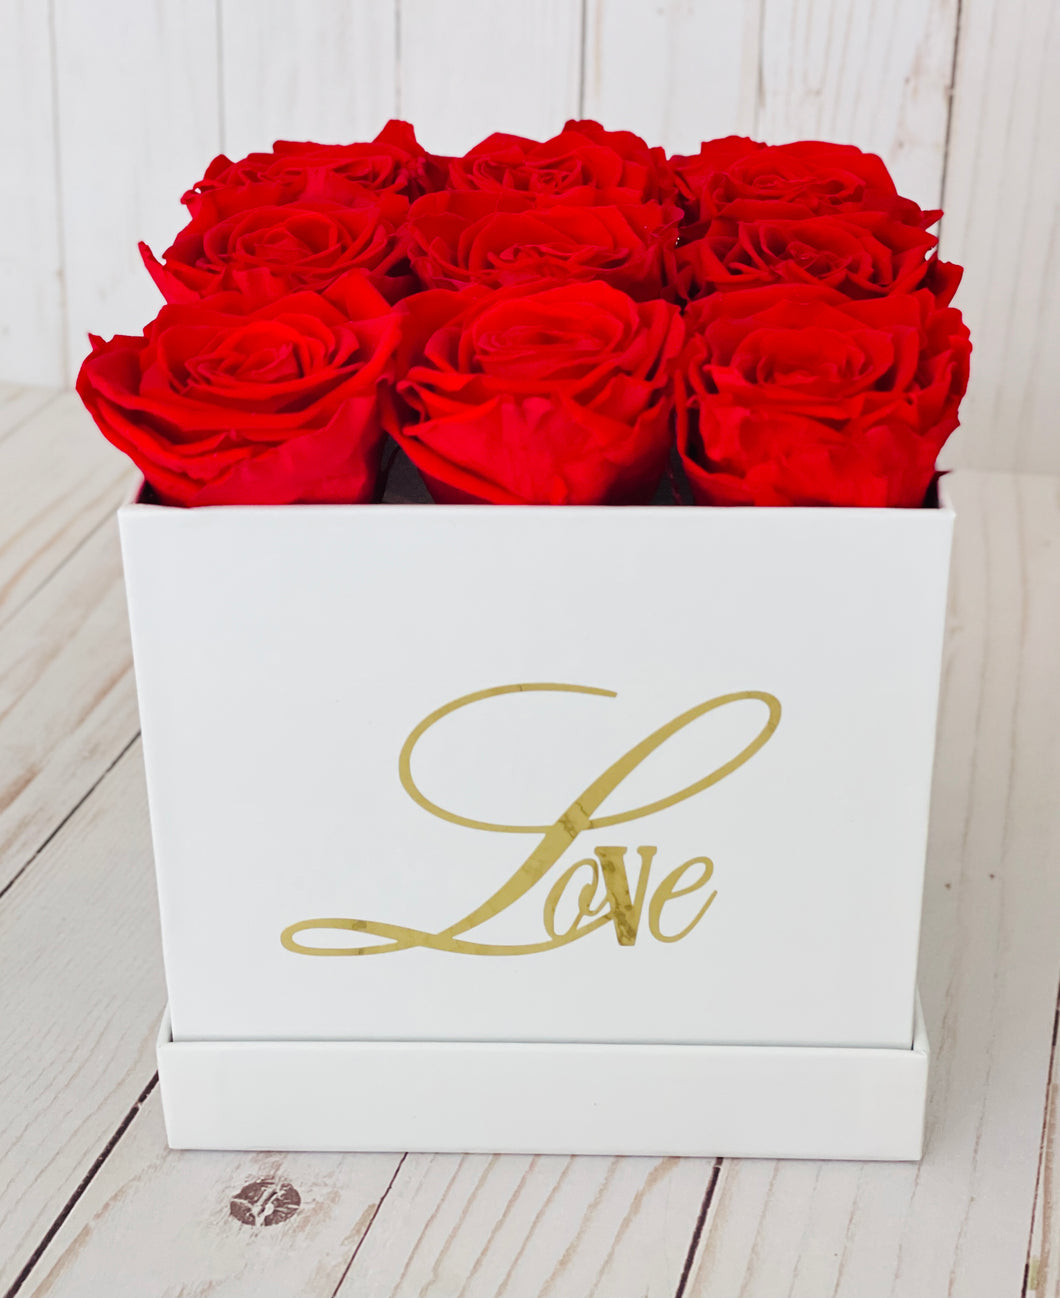 The Love Square Flower Box